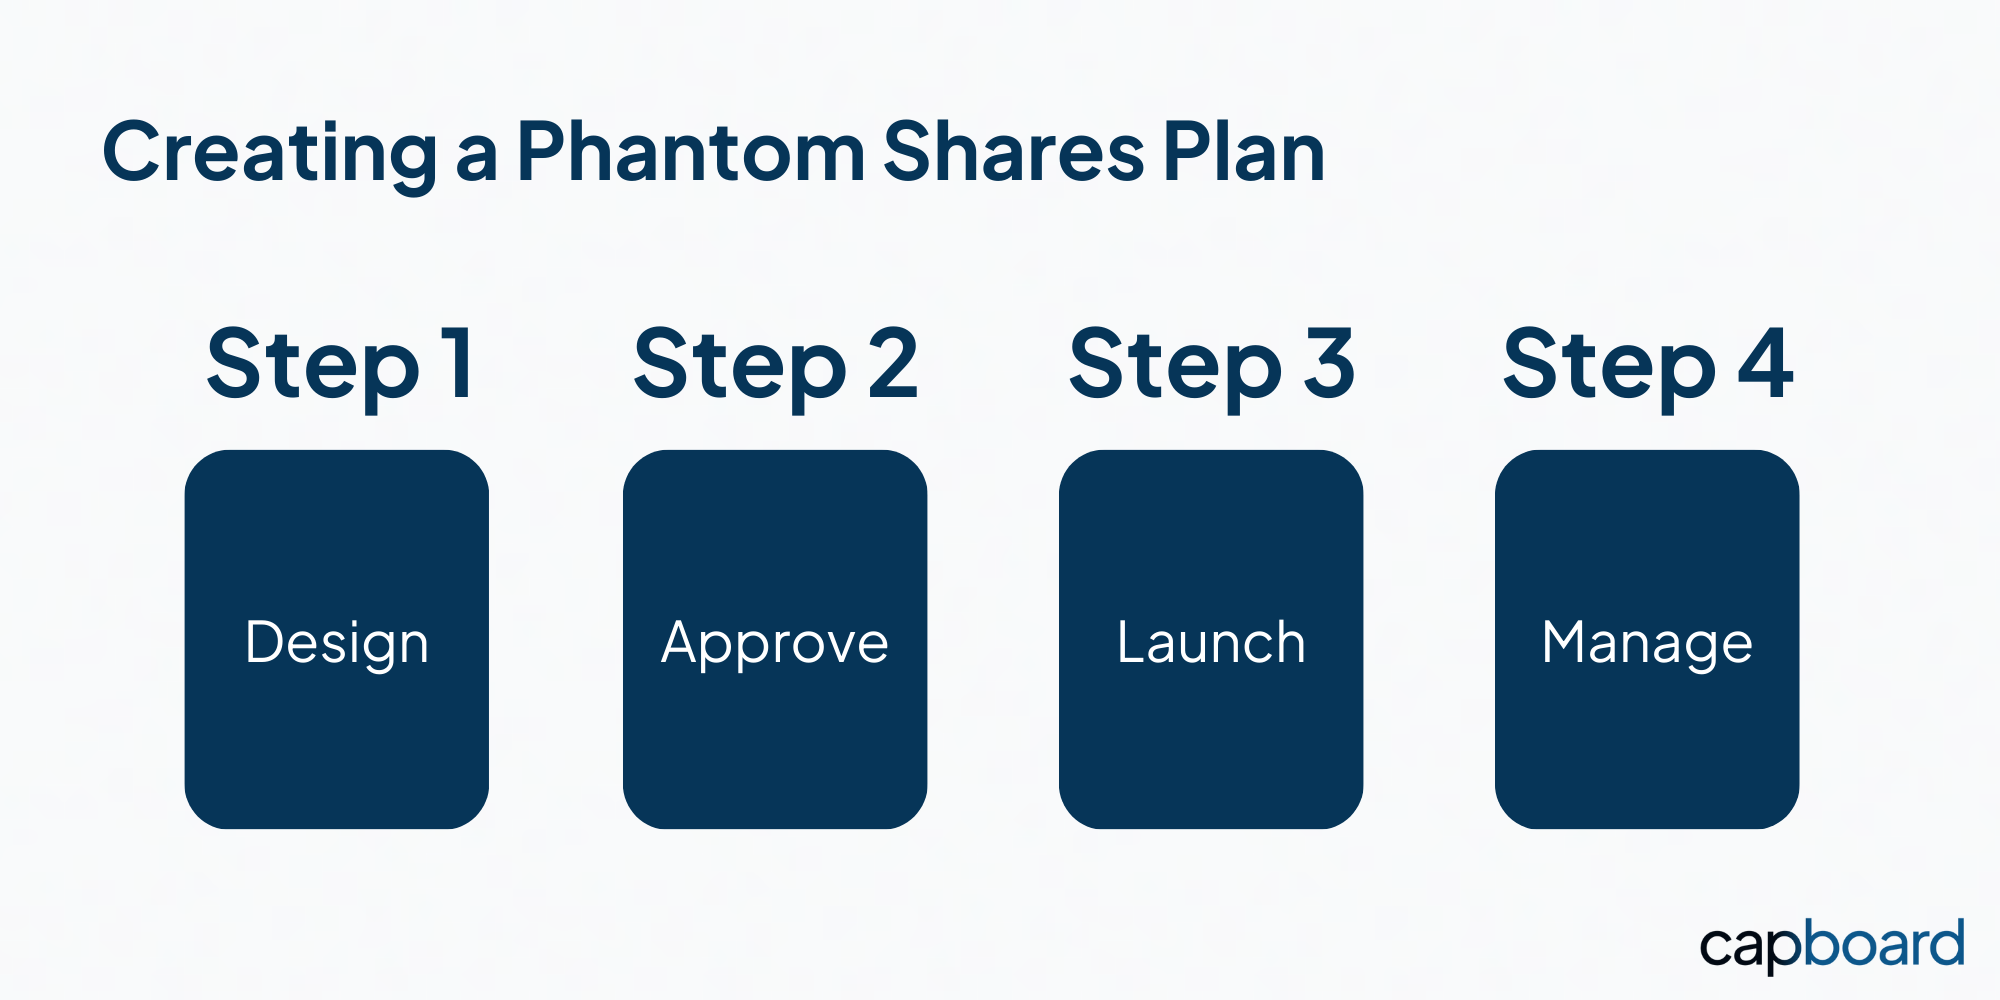 4-step process to create a phantom shares plan: Design, Approve, Launch and Manage